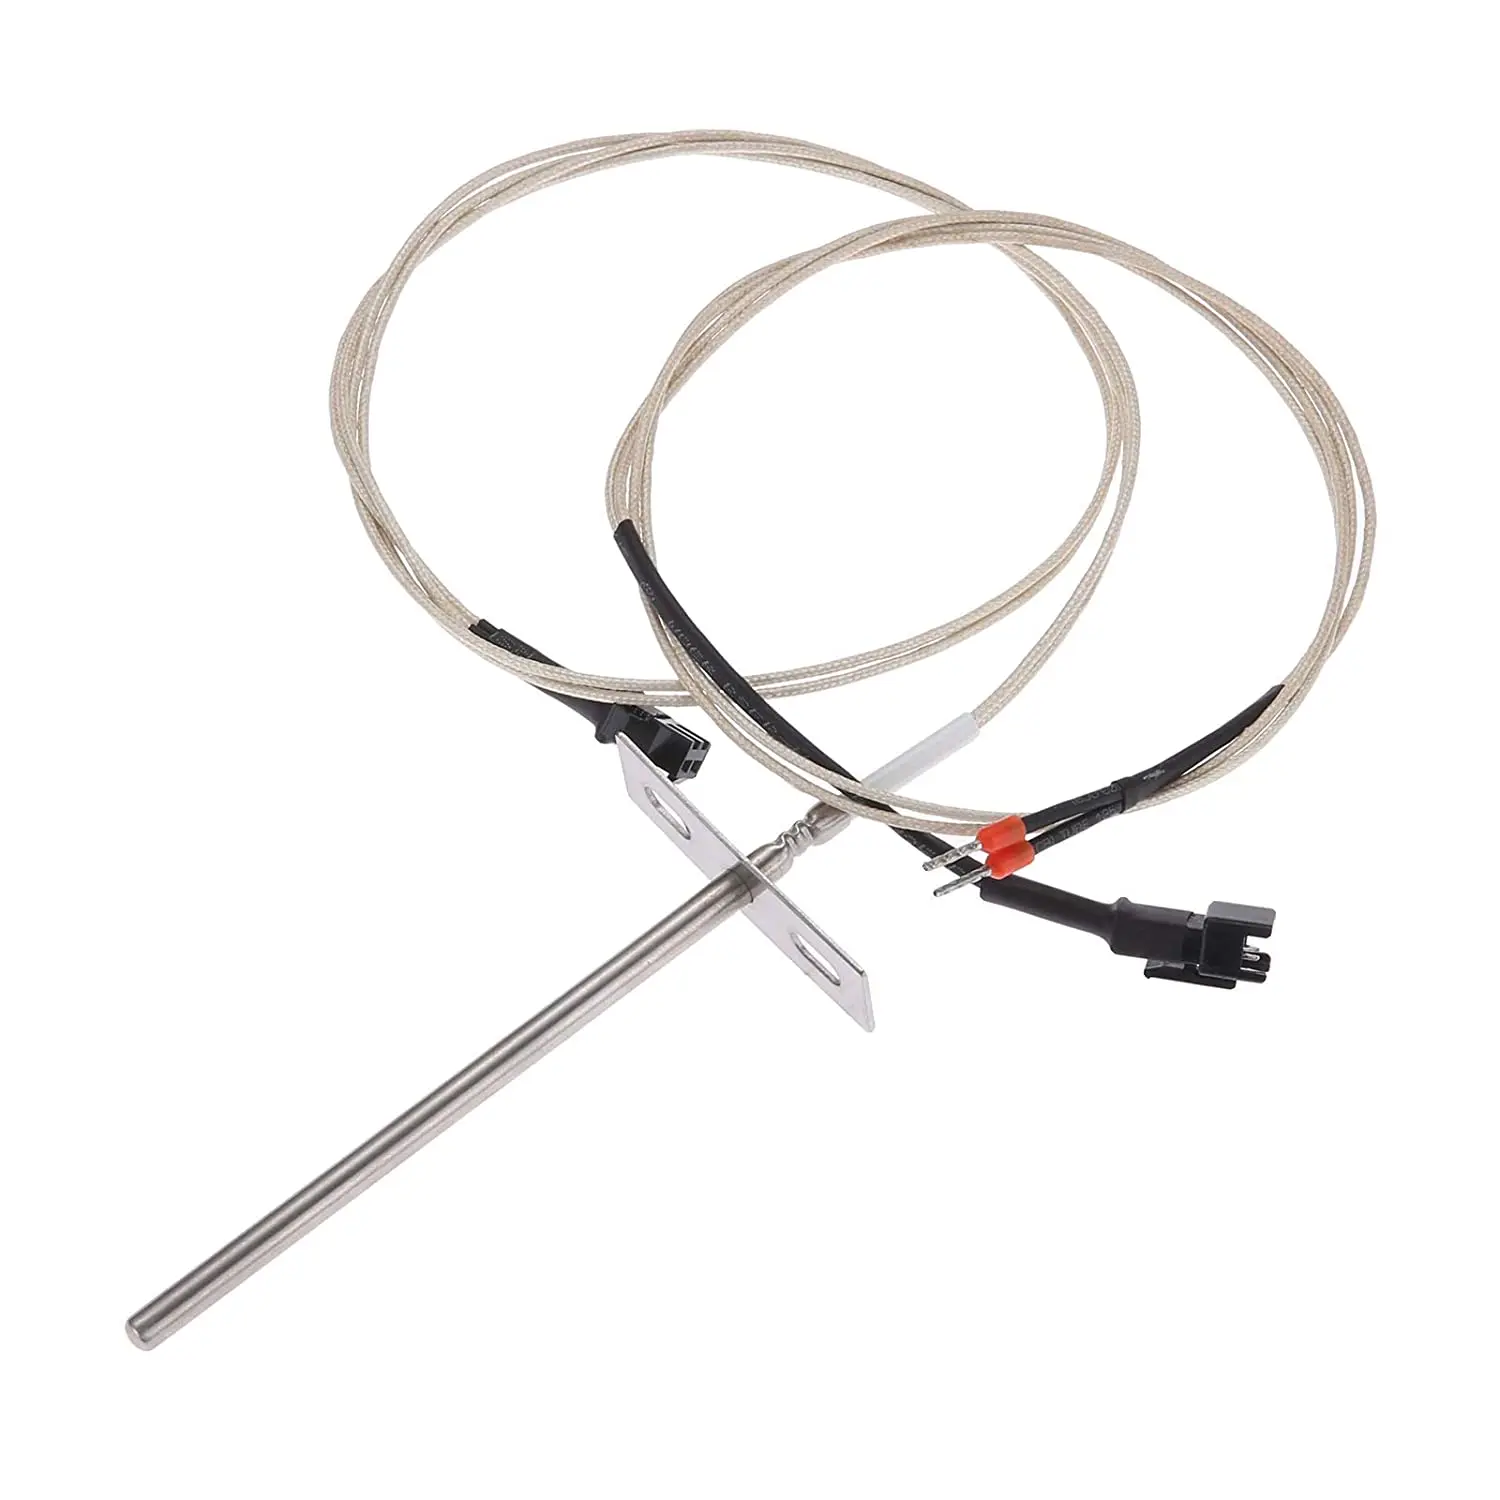 Replace High-TEMP Meat Probe Sensor for Pit Boss 700 and 820